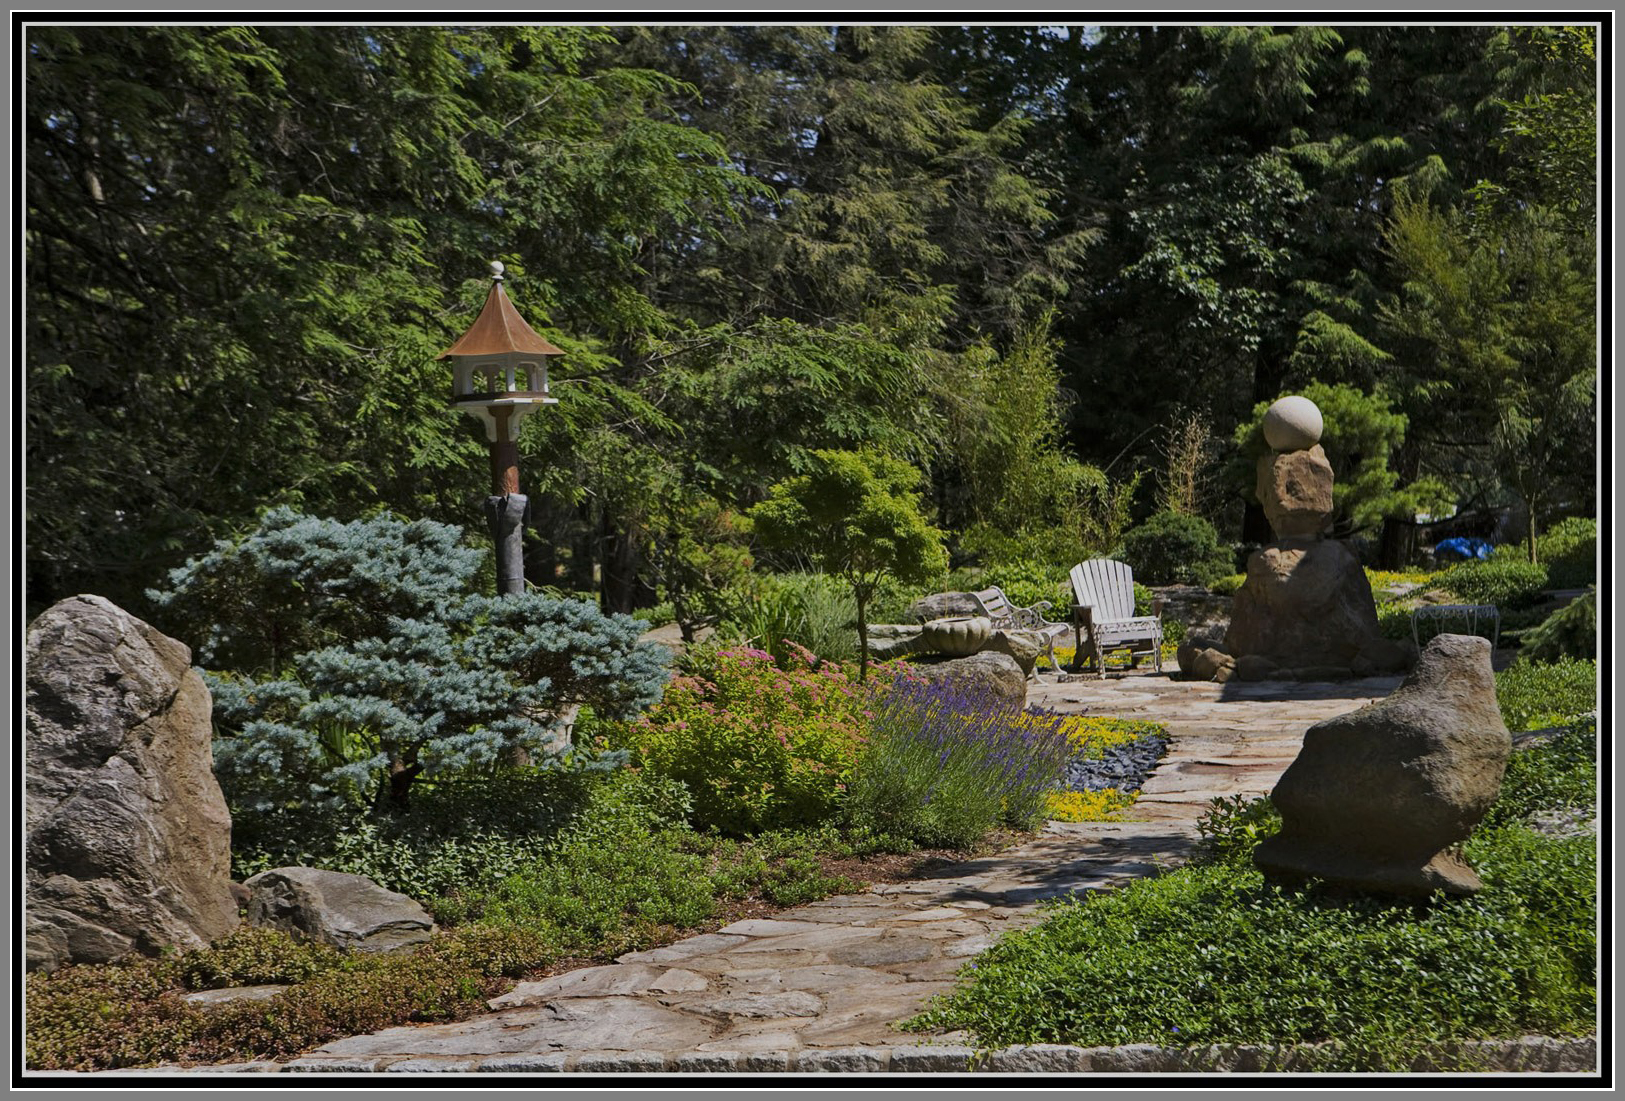 Flag stone walkway with beautiful garden and ornaments